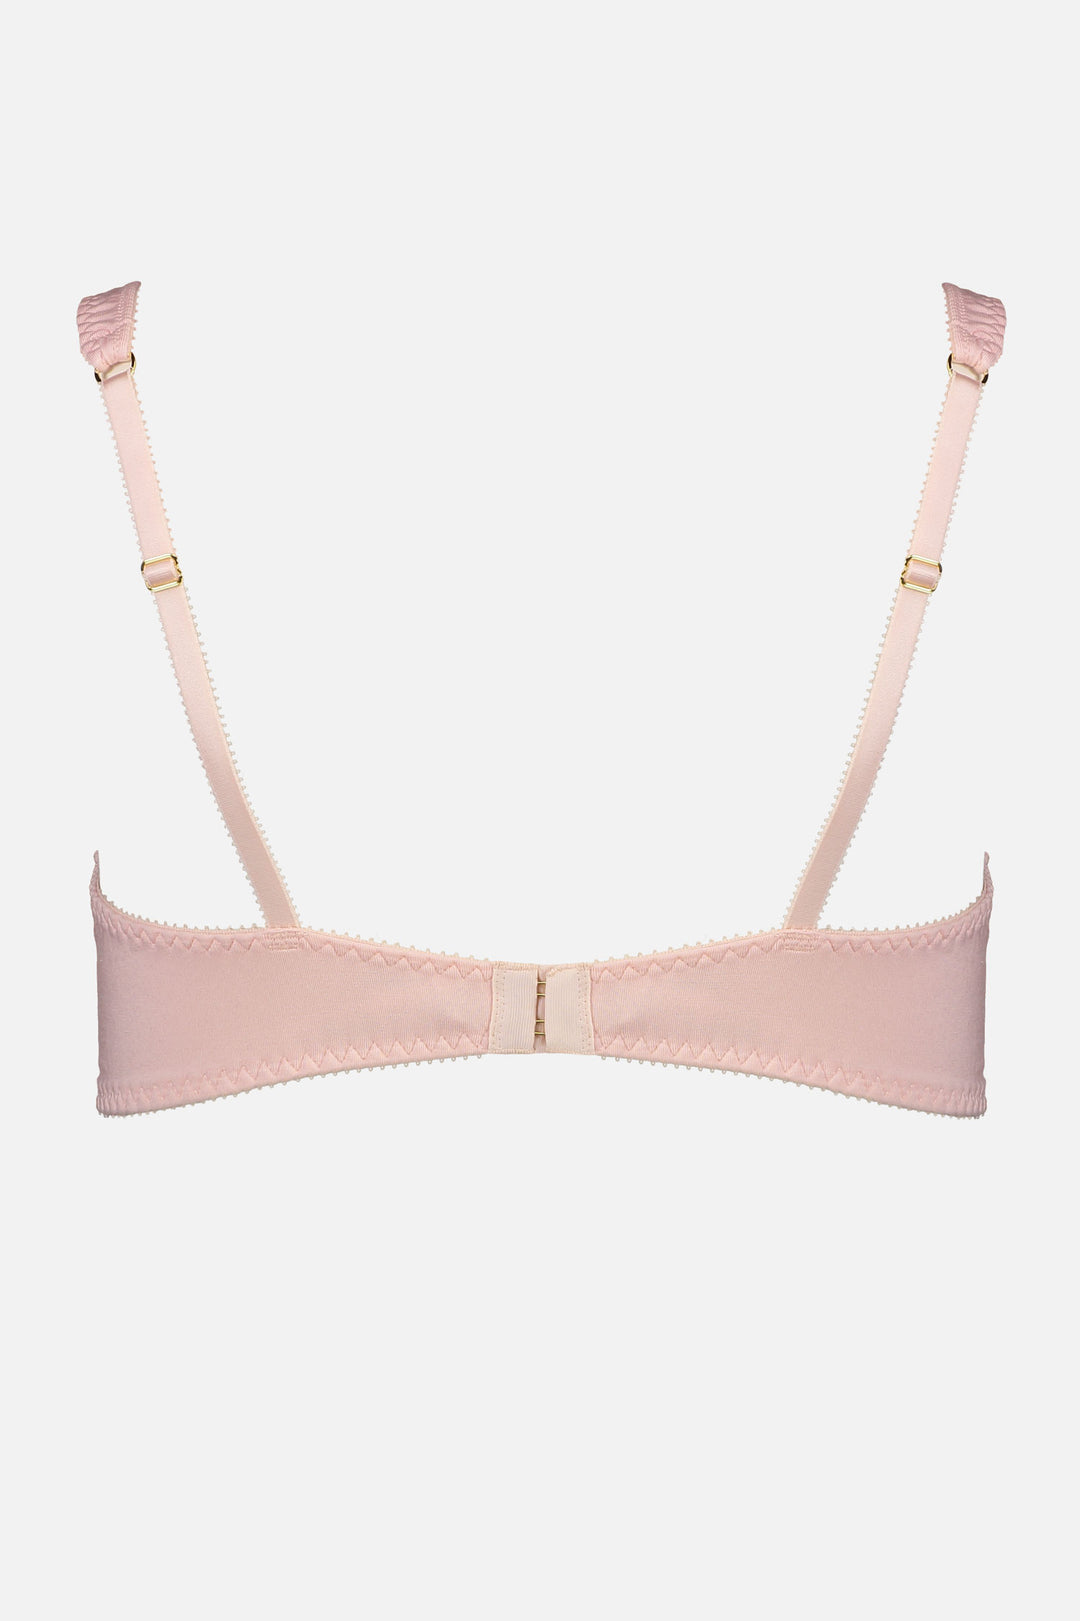 Videris Lingerie Sarah underwire free soft cup bra in pink TENCEL™ features adjustable back straps and hook and eyes closure